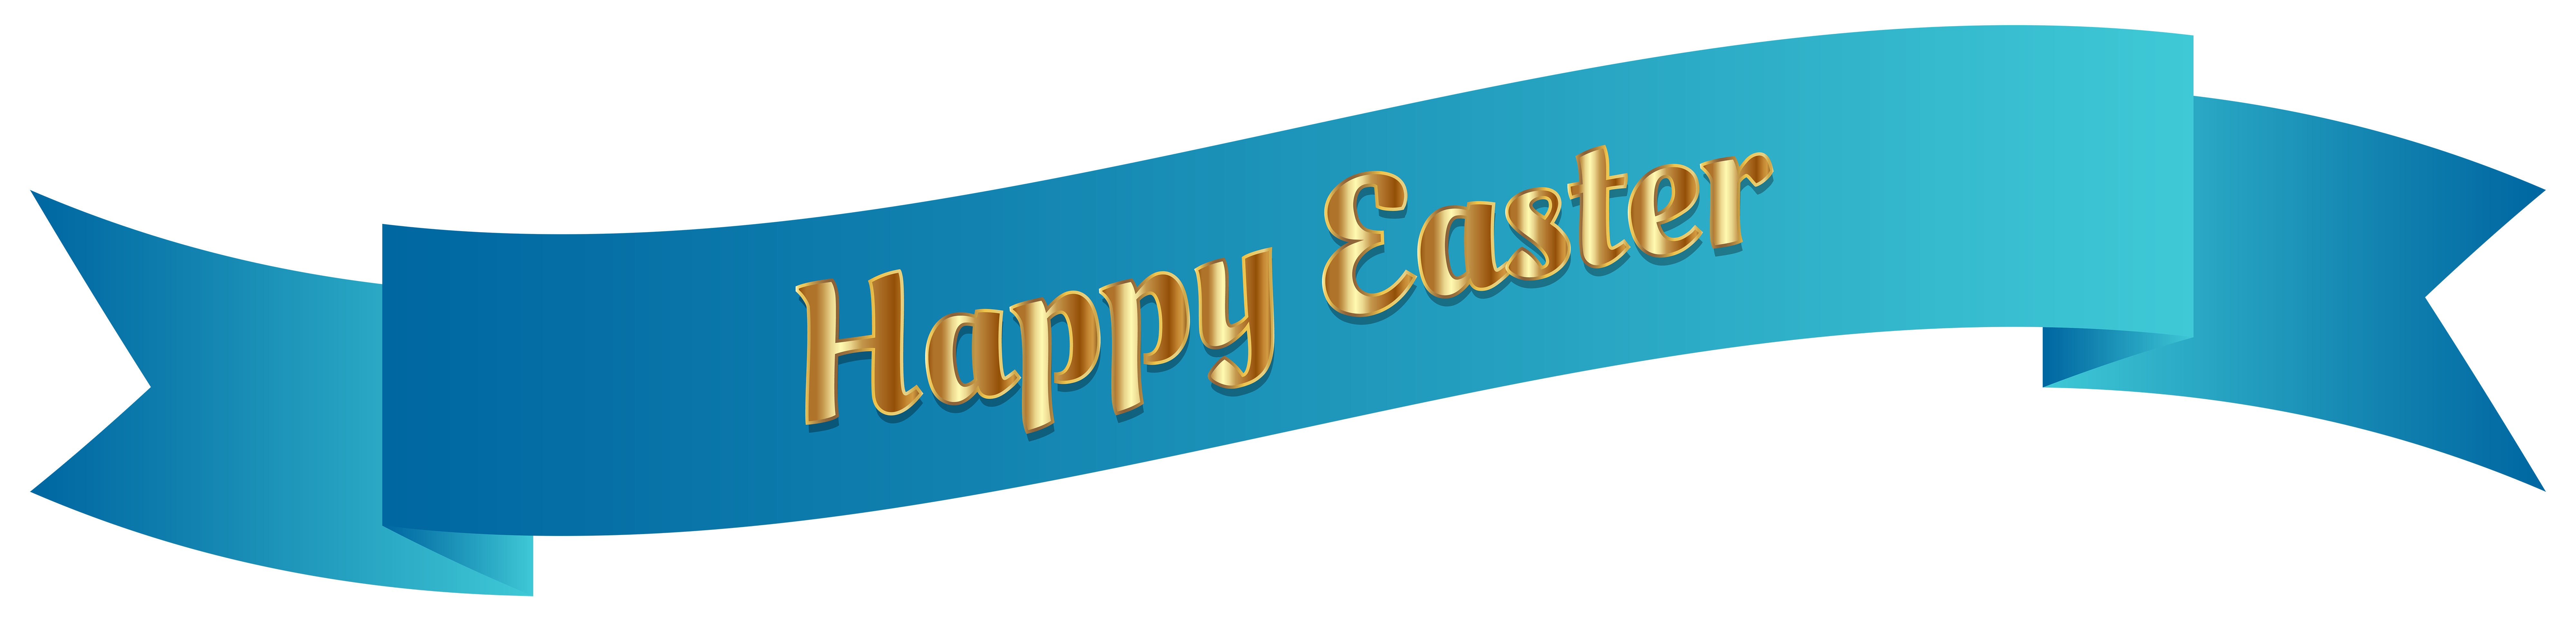 free easter banner clipart - photo #43